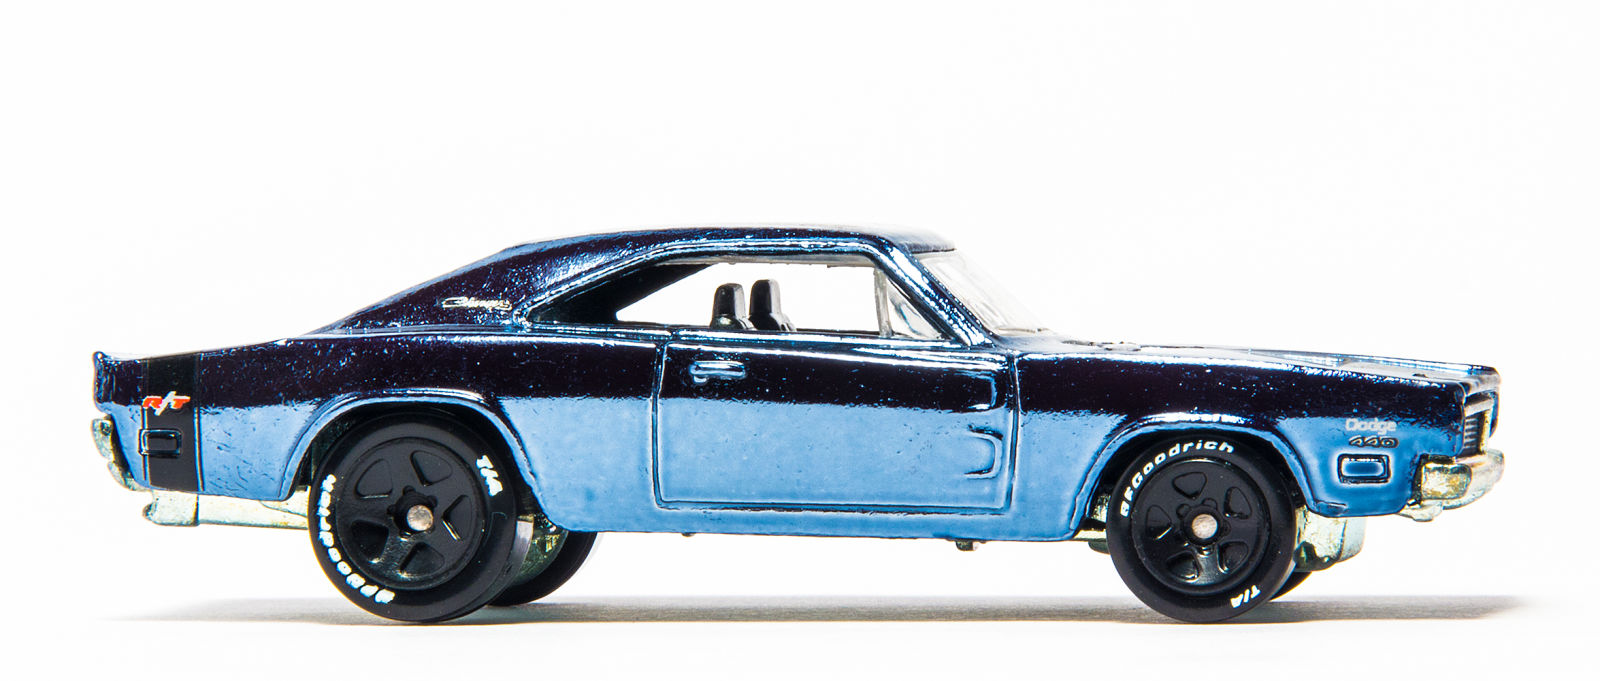 Illustration for article titled MoPar Monday - Classics Series Charger